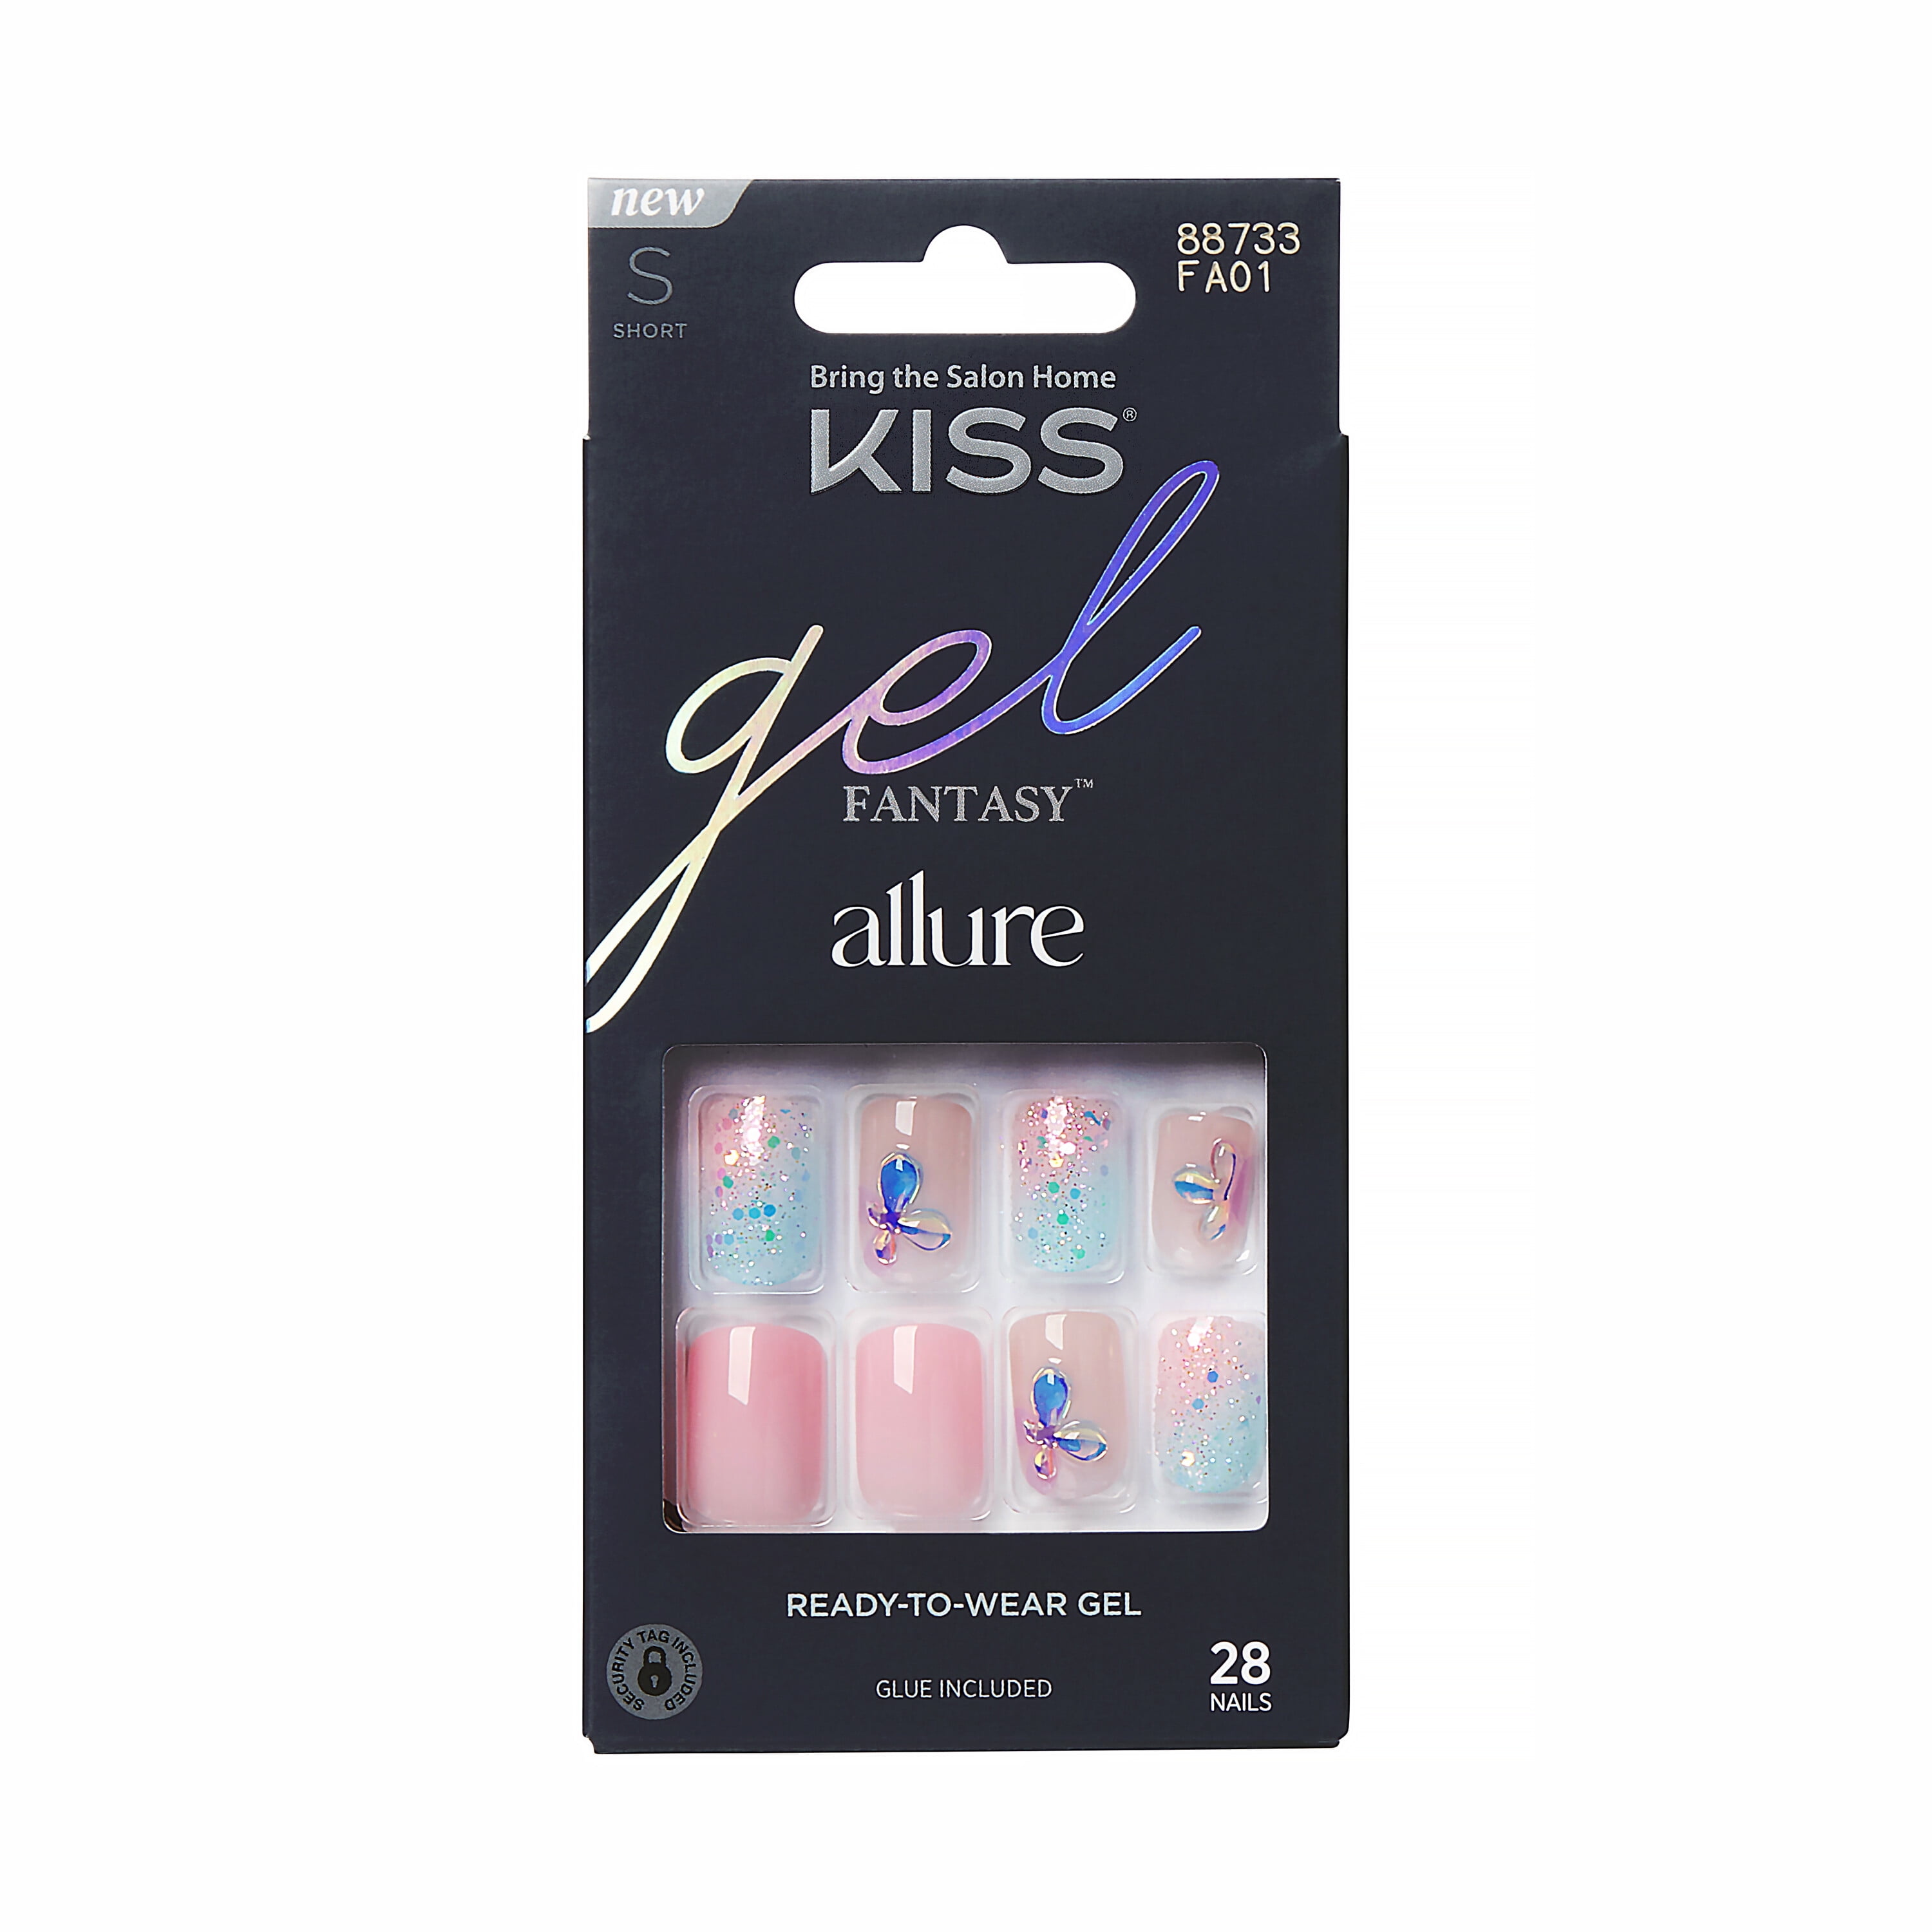 KISS Gel Fantasy Allure Ready-To-Wear Short Square Fake Nails, Pink ...